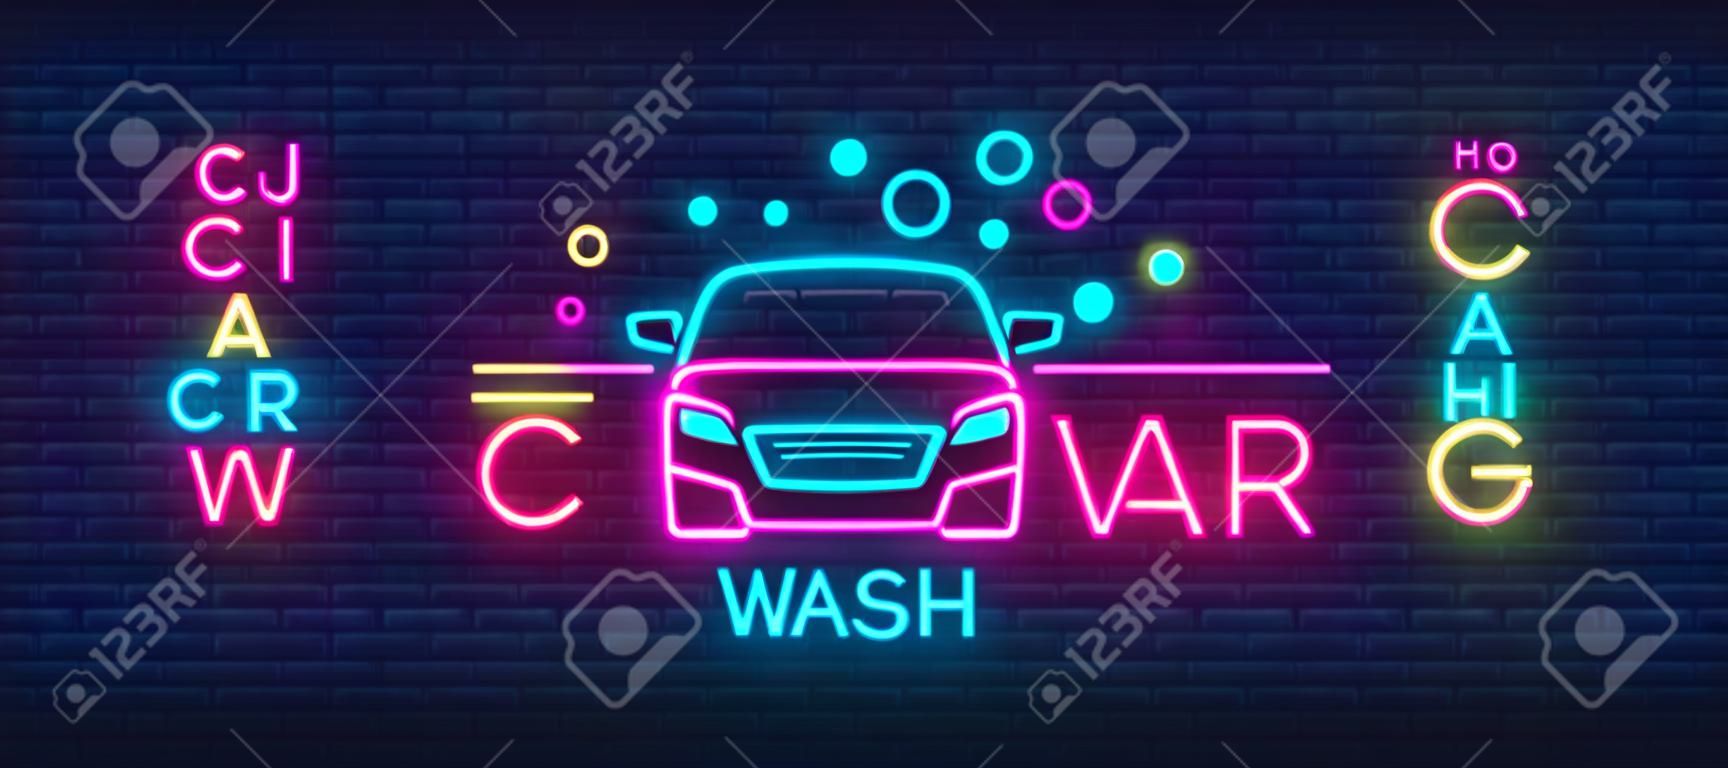 Car wash logo vector design in neon style vector illustration isolated. Template, concept, luminous signboard icon on a car wash theme. Luminous banner. Editing text neon sign. Neon alphabet